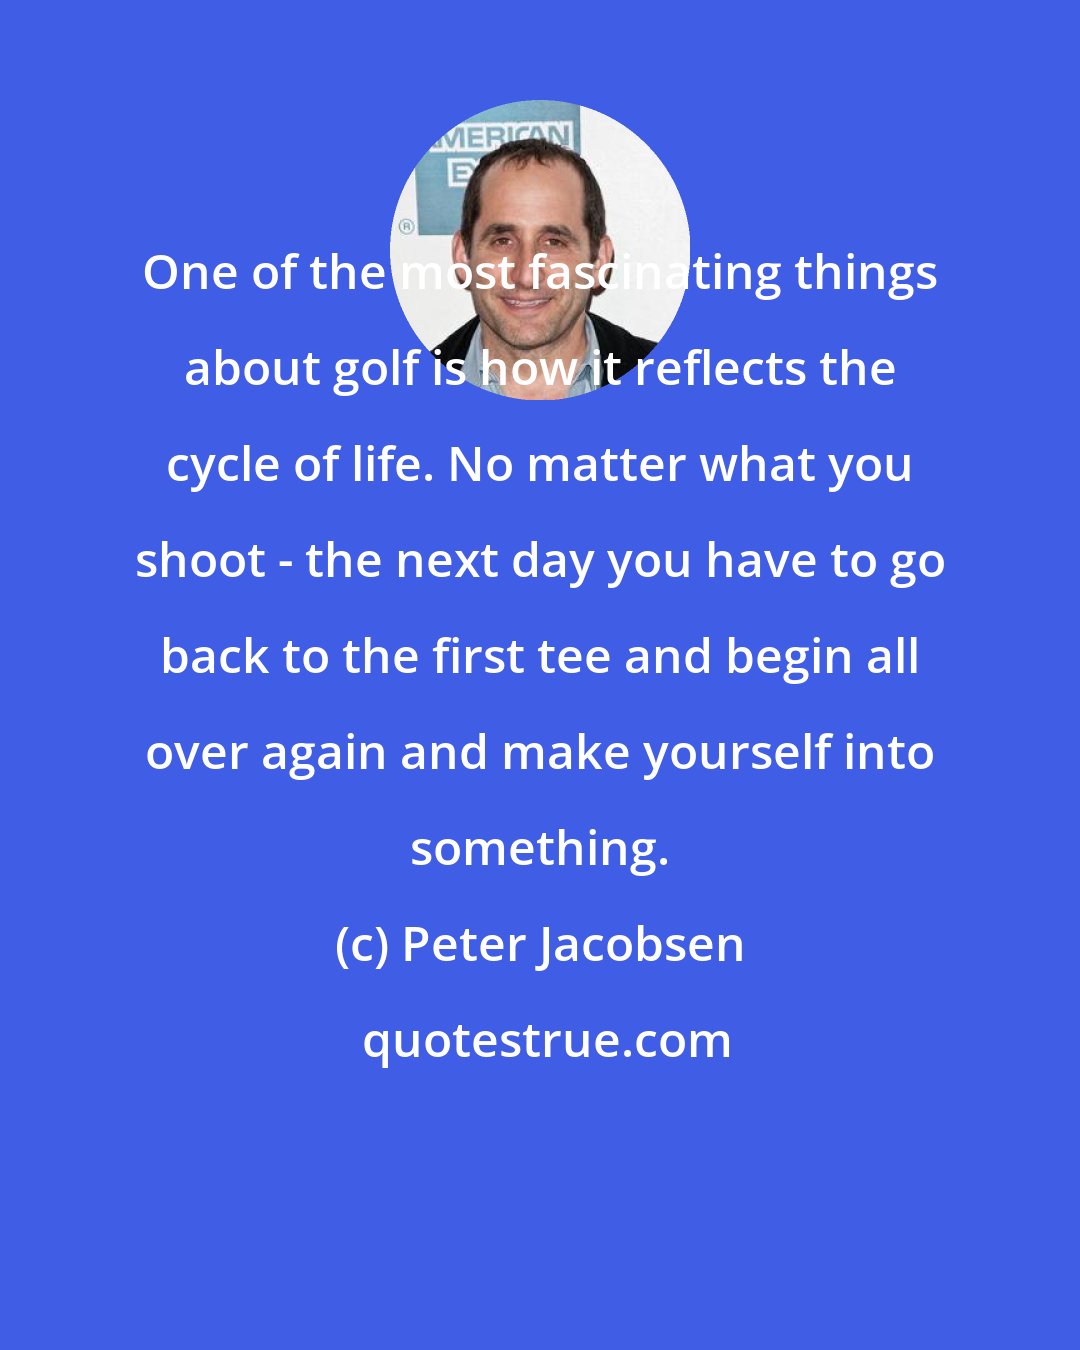 Peter Jacobsen: One of the most fascinating things about golf is how it reflects the cycle of life. No matter what you shoot - the next day you have to go back to the first tee and begin all over again and make yourself into something.